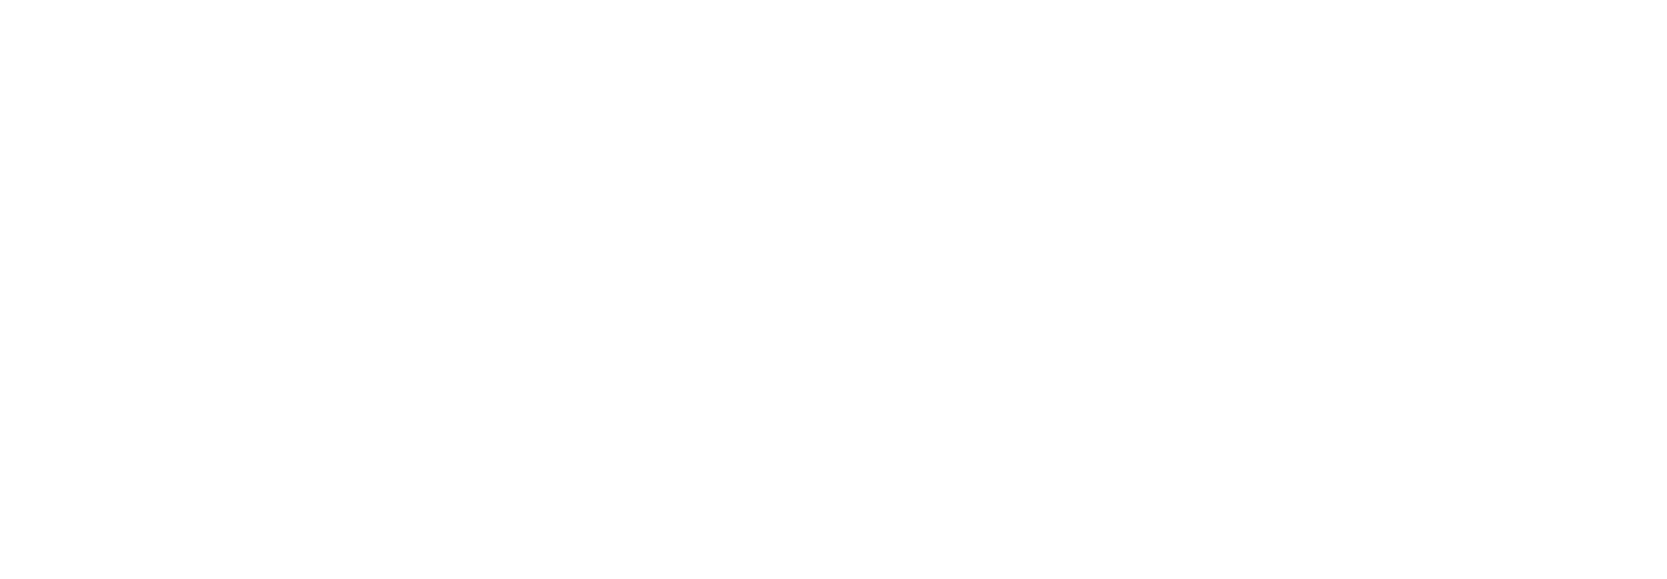 All caps text reads "Graduate Fellowships [lower triangle separation] 2023."